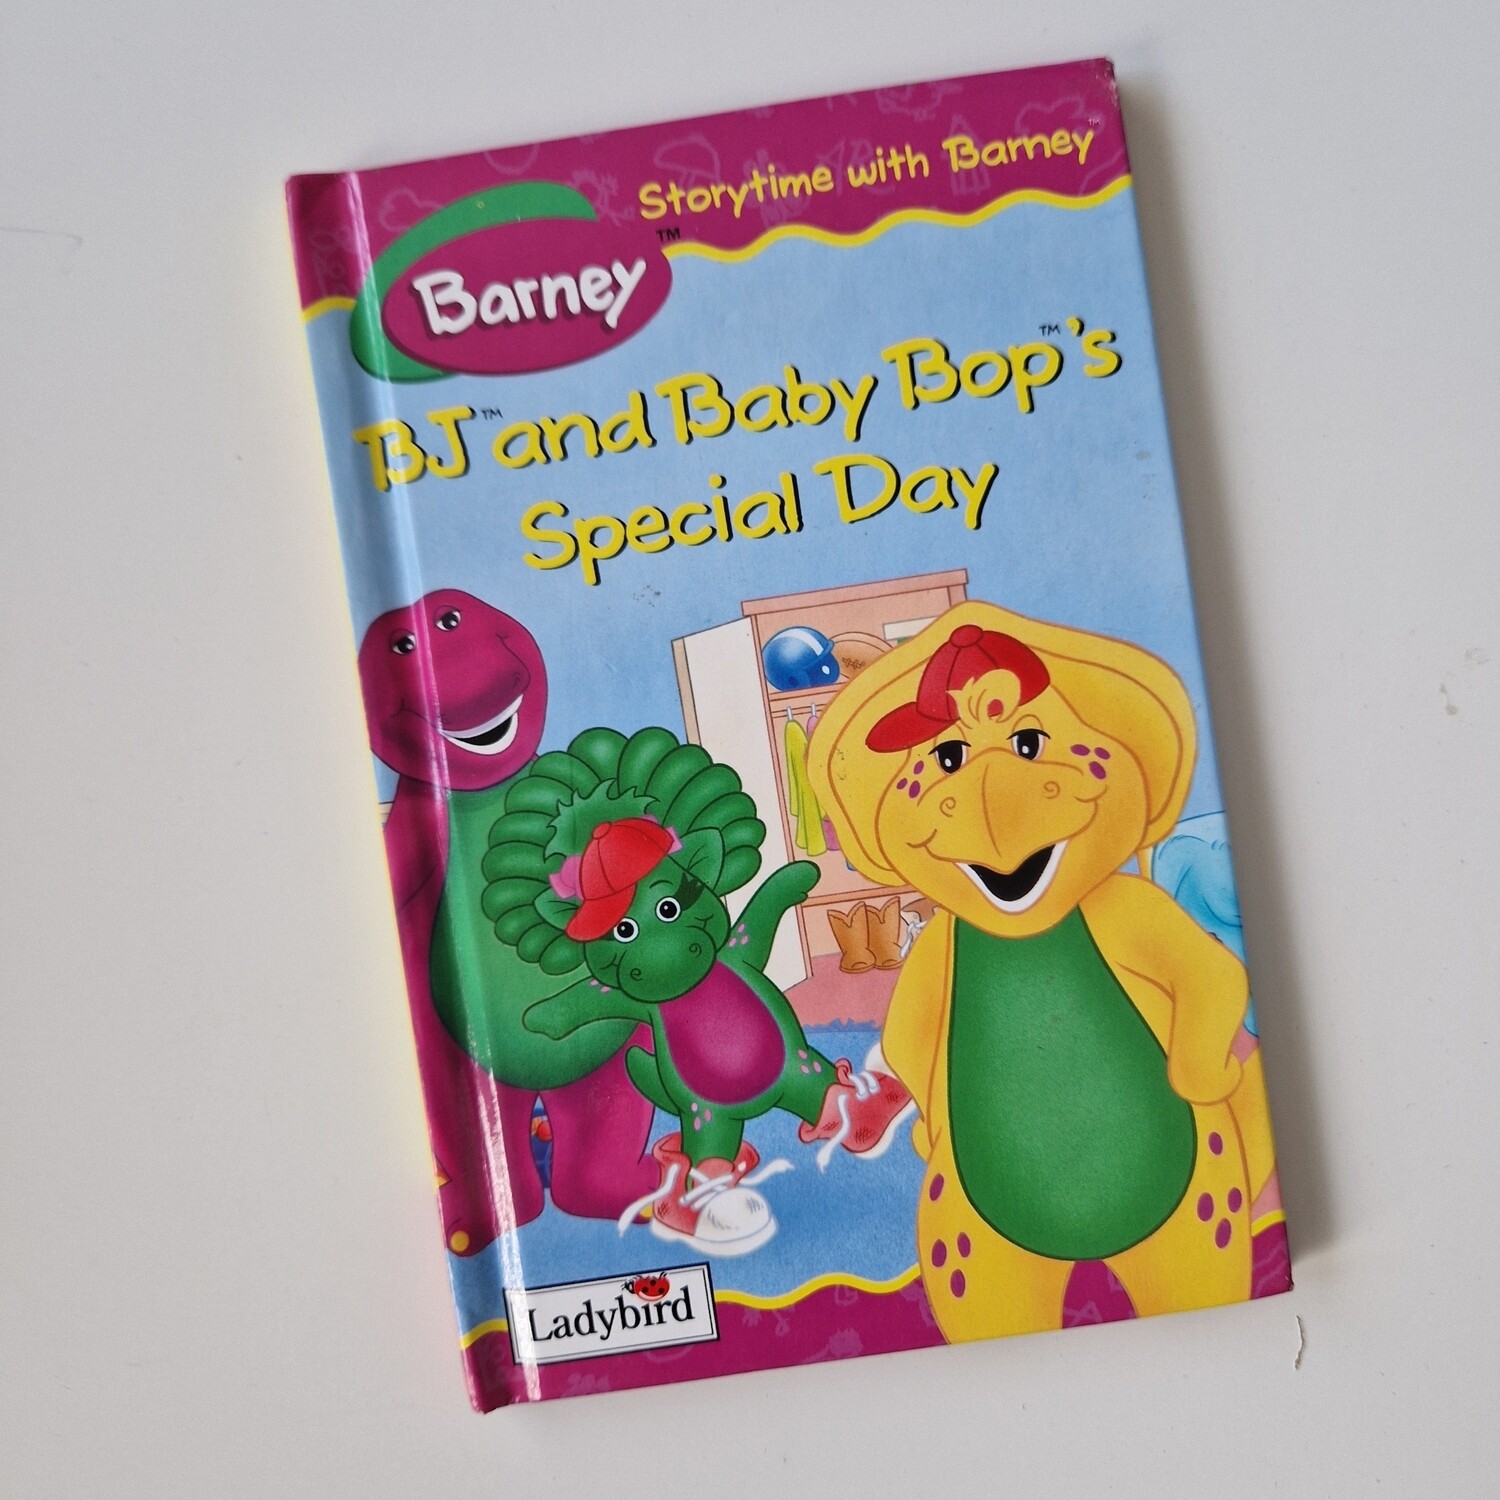 Barney - BJ & Baby Bop's Special Day